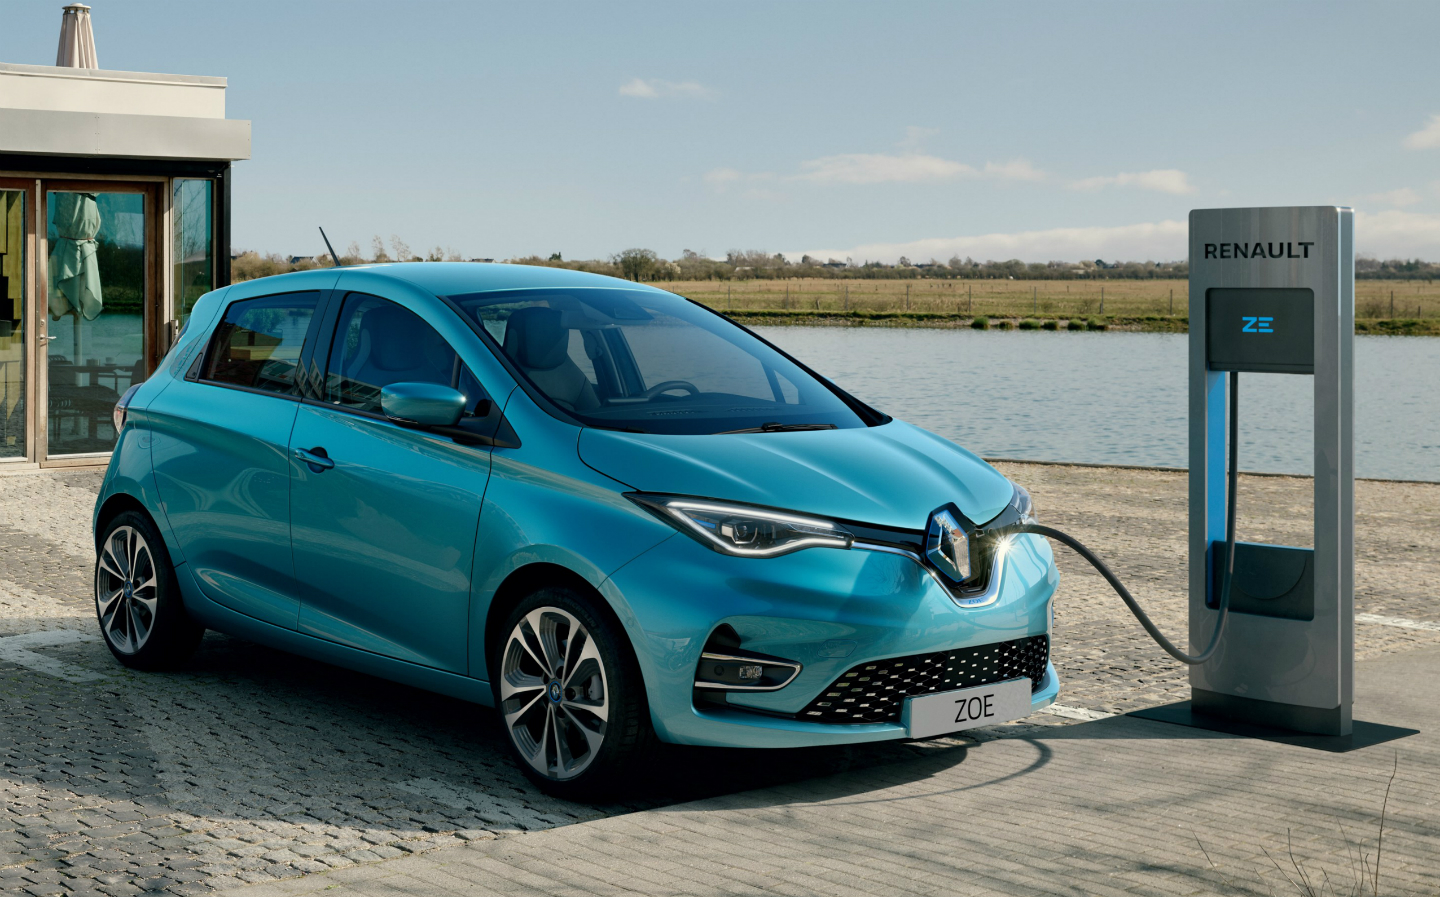 2020 Renault Zoe: prices, electric range, specs and release date